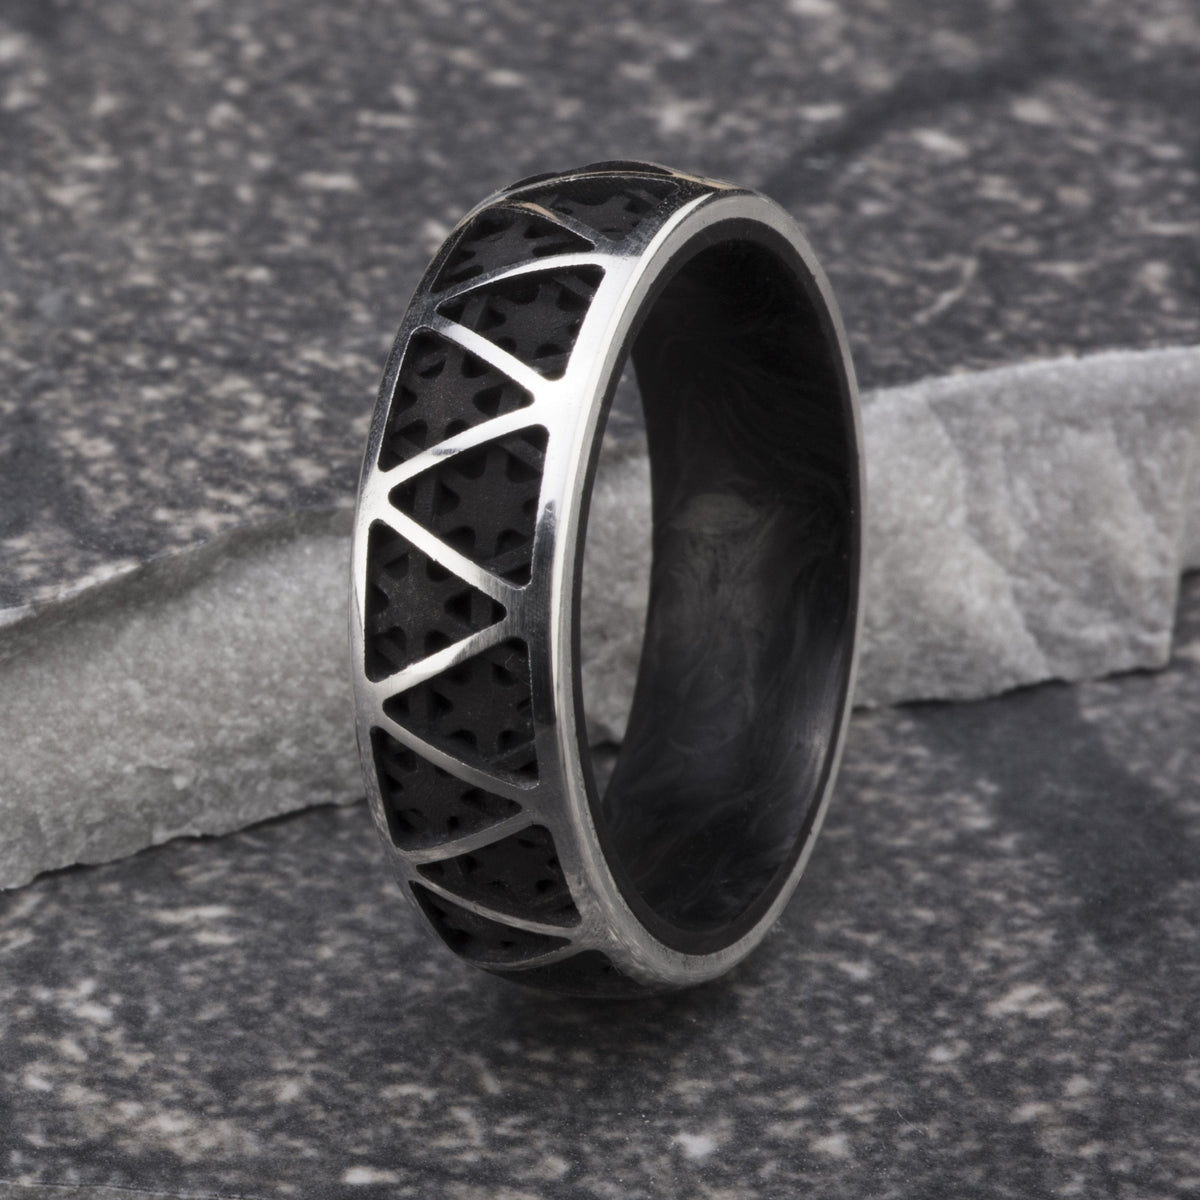 Sterling silver ring featuring a triangular pattern and a forged carbon fiber interior. 